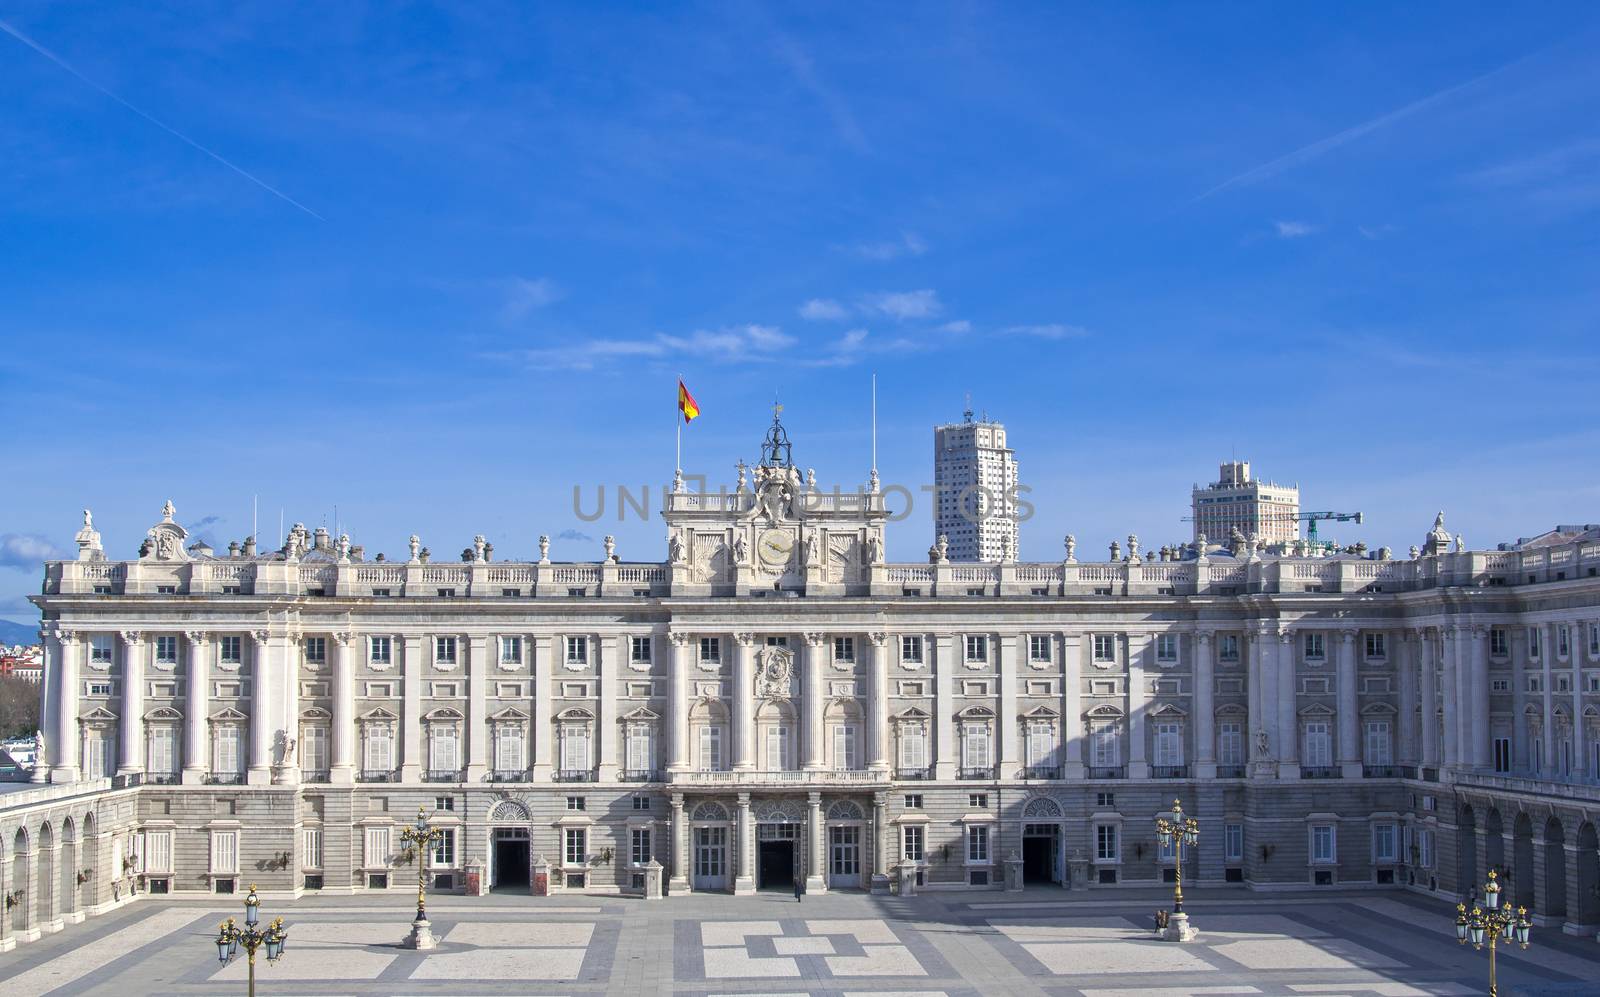 Royal palace in Madrid, Spain by eans